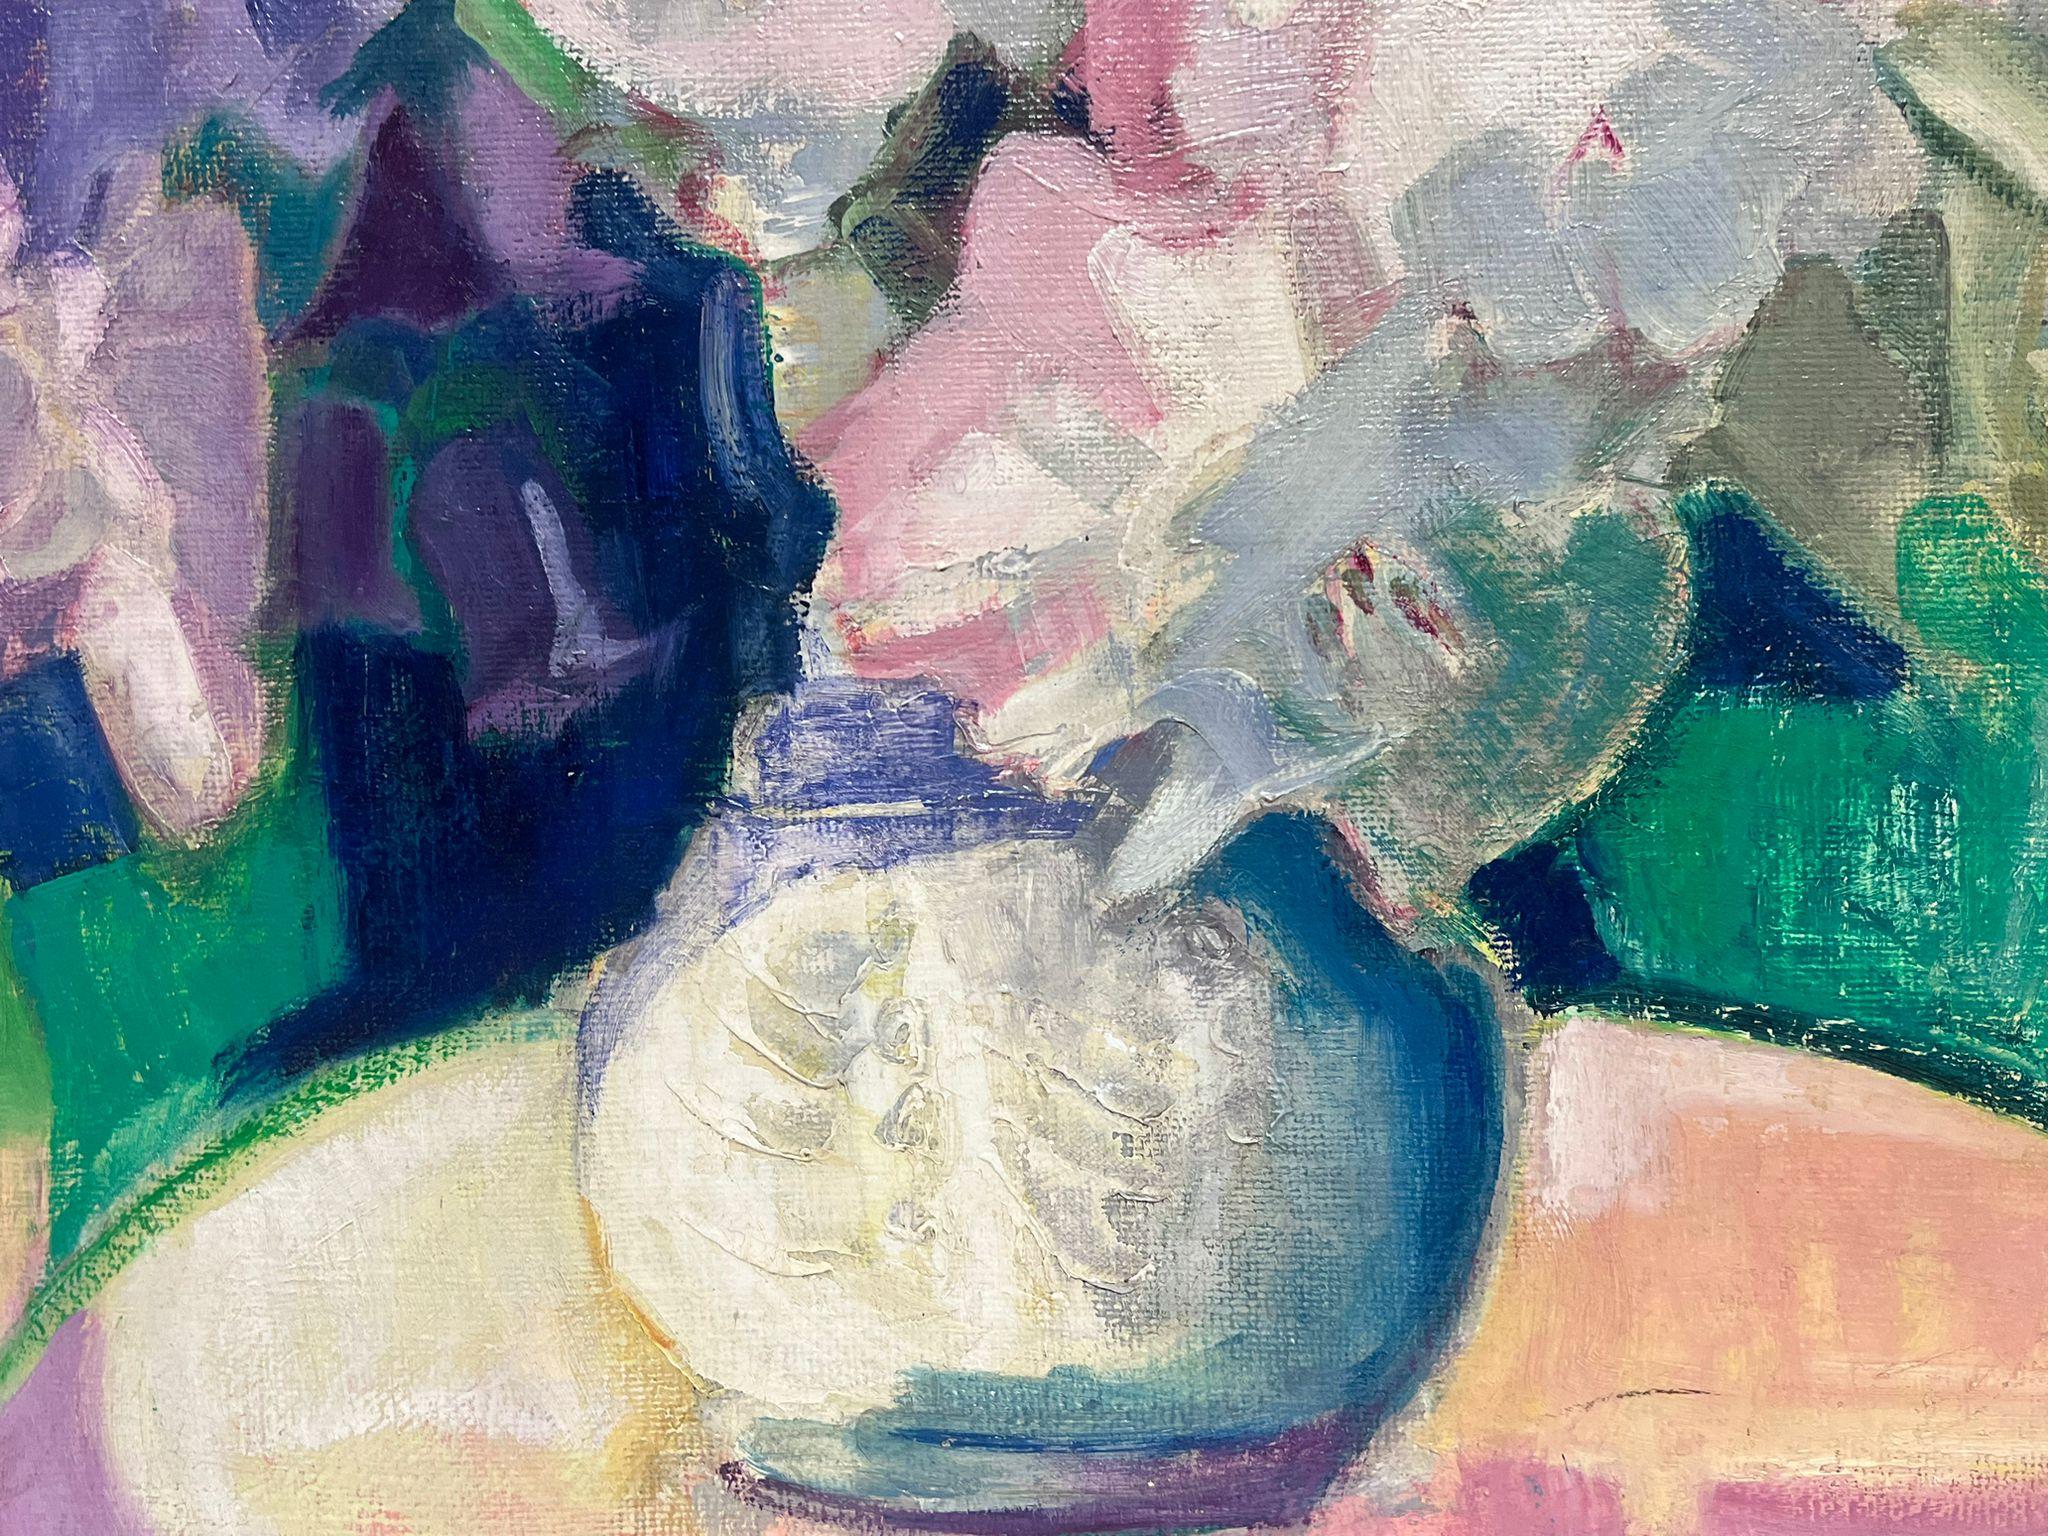 Flowers in Vase
by Lucie River (French female artist b. 1910)
titled and inscribed verso
signed oil on canvas, unframed
canvas: 26 x 32 inches
inscribed verso
provenance: private collection, France
condition: very good and sound condition 